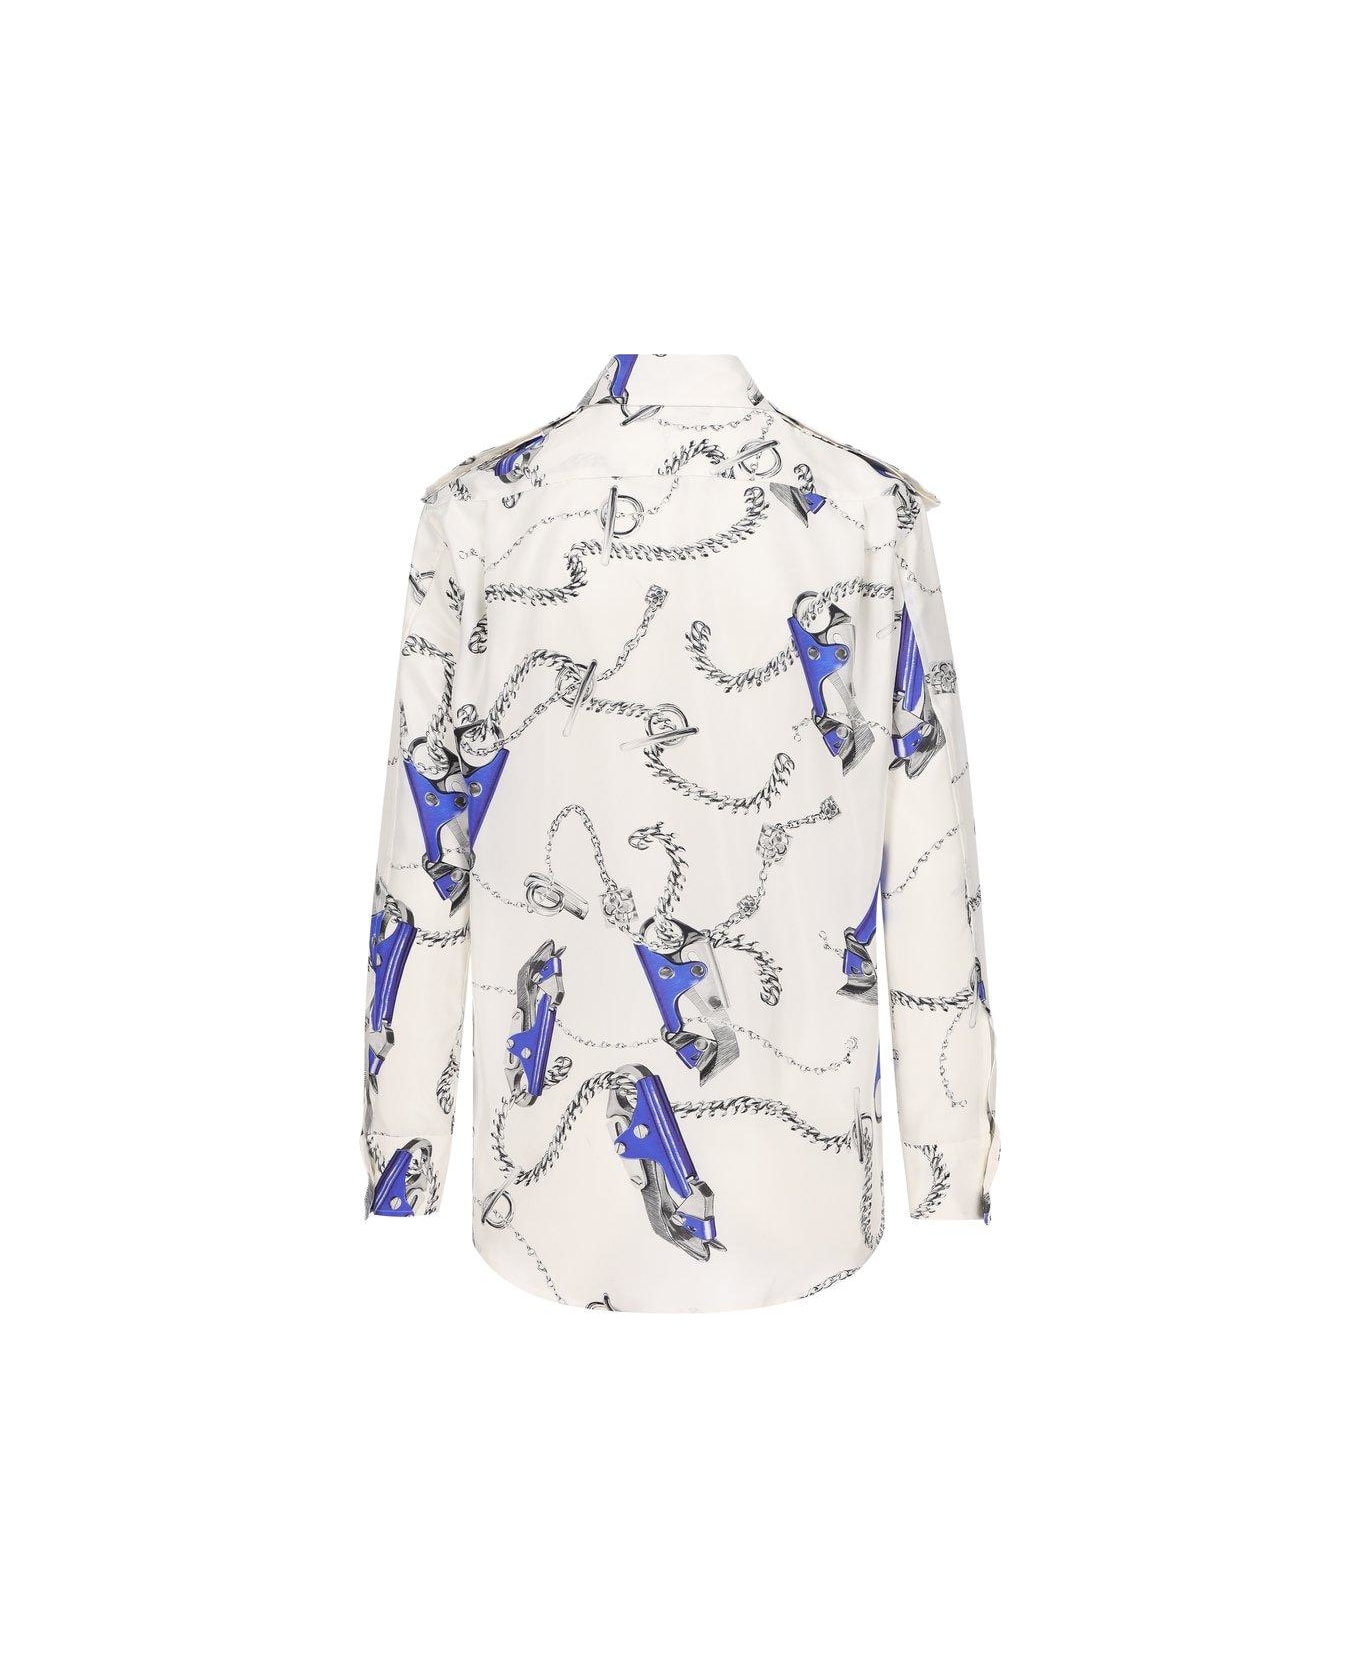 Burberry Graphic Printed Buttoned Shirt - WHITE/BLUE